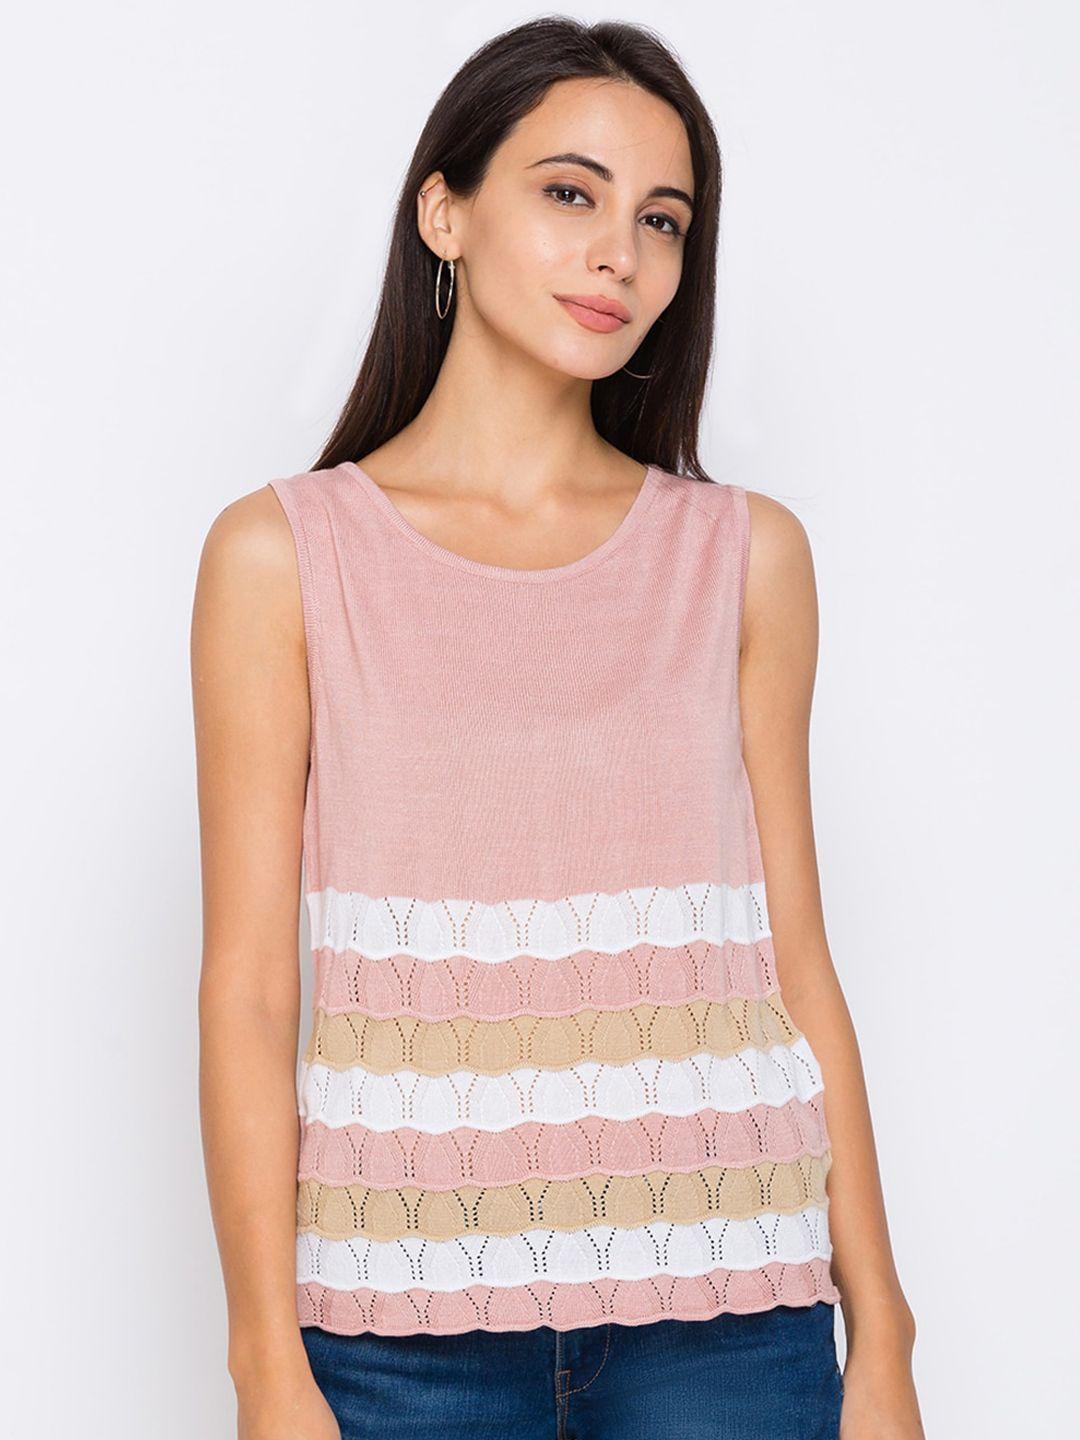 globus pink & white striped a-line top